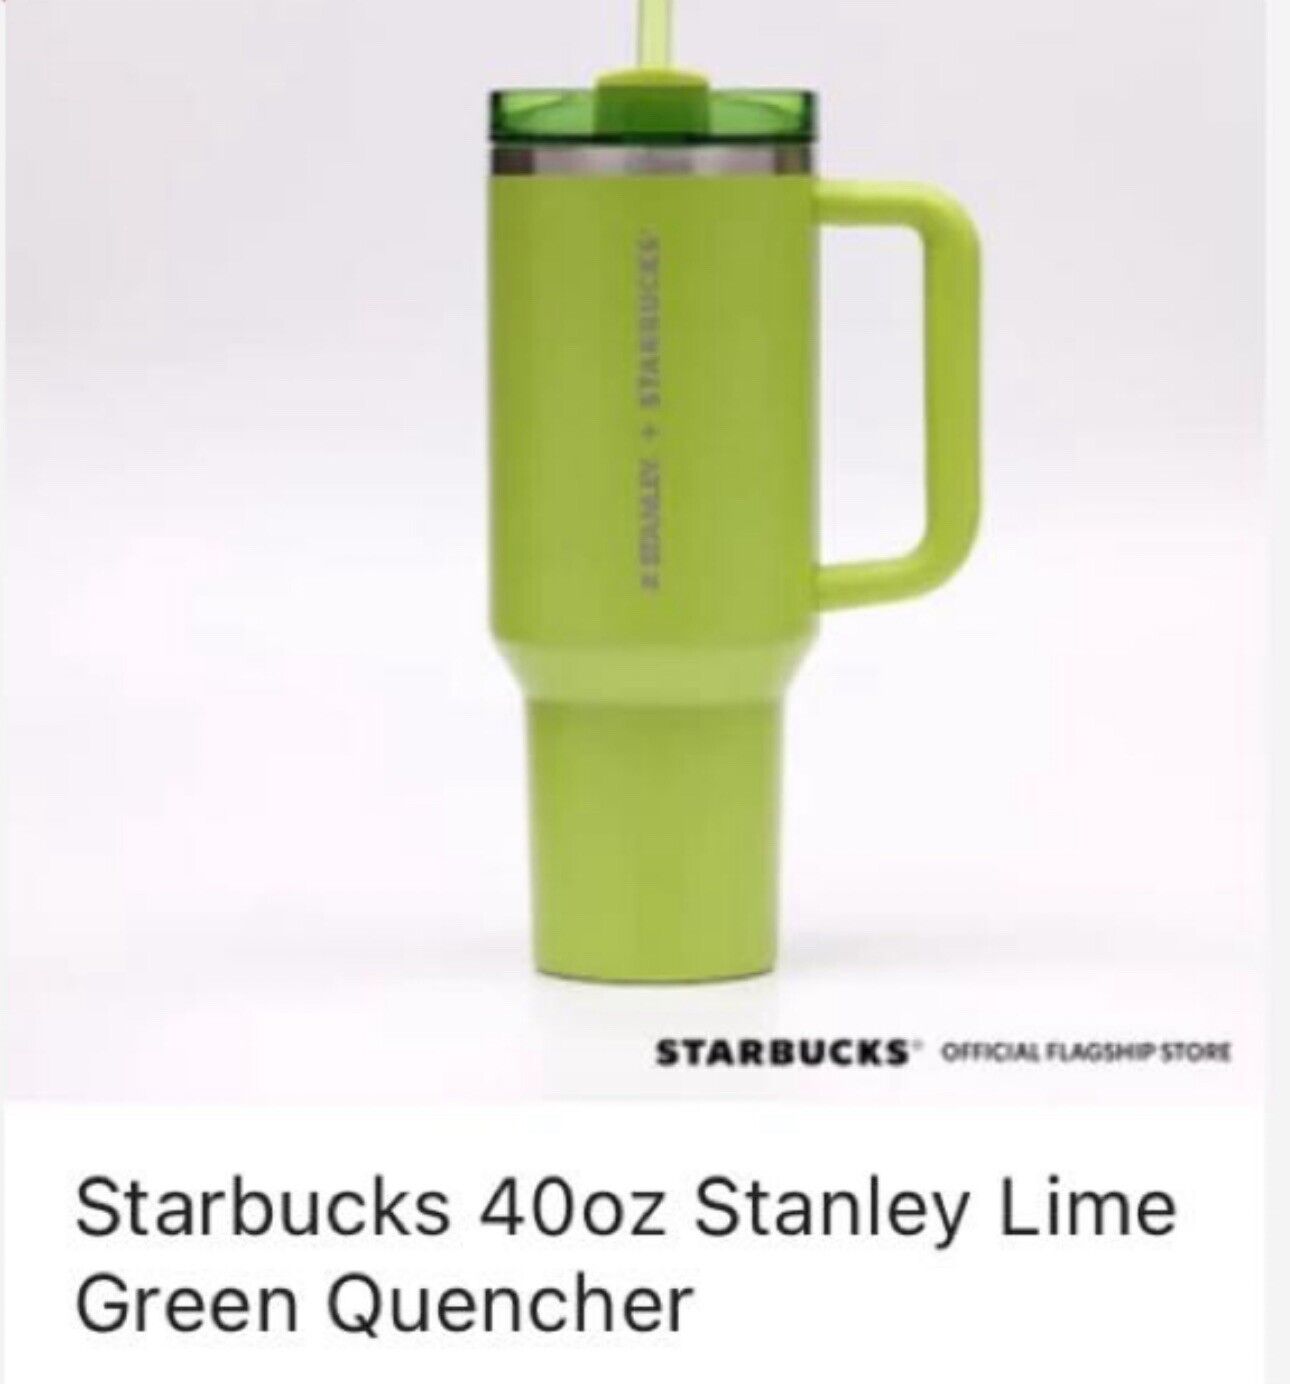 Stanley x Starbucks Philippines Exclusive Lime Green 40oz Quencher - US SELLER